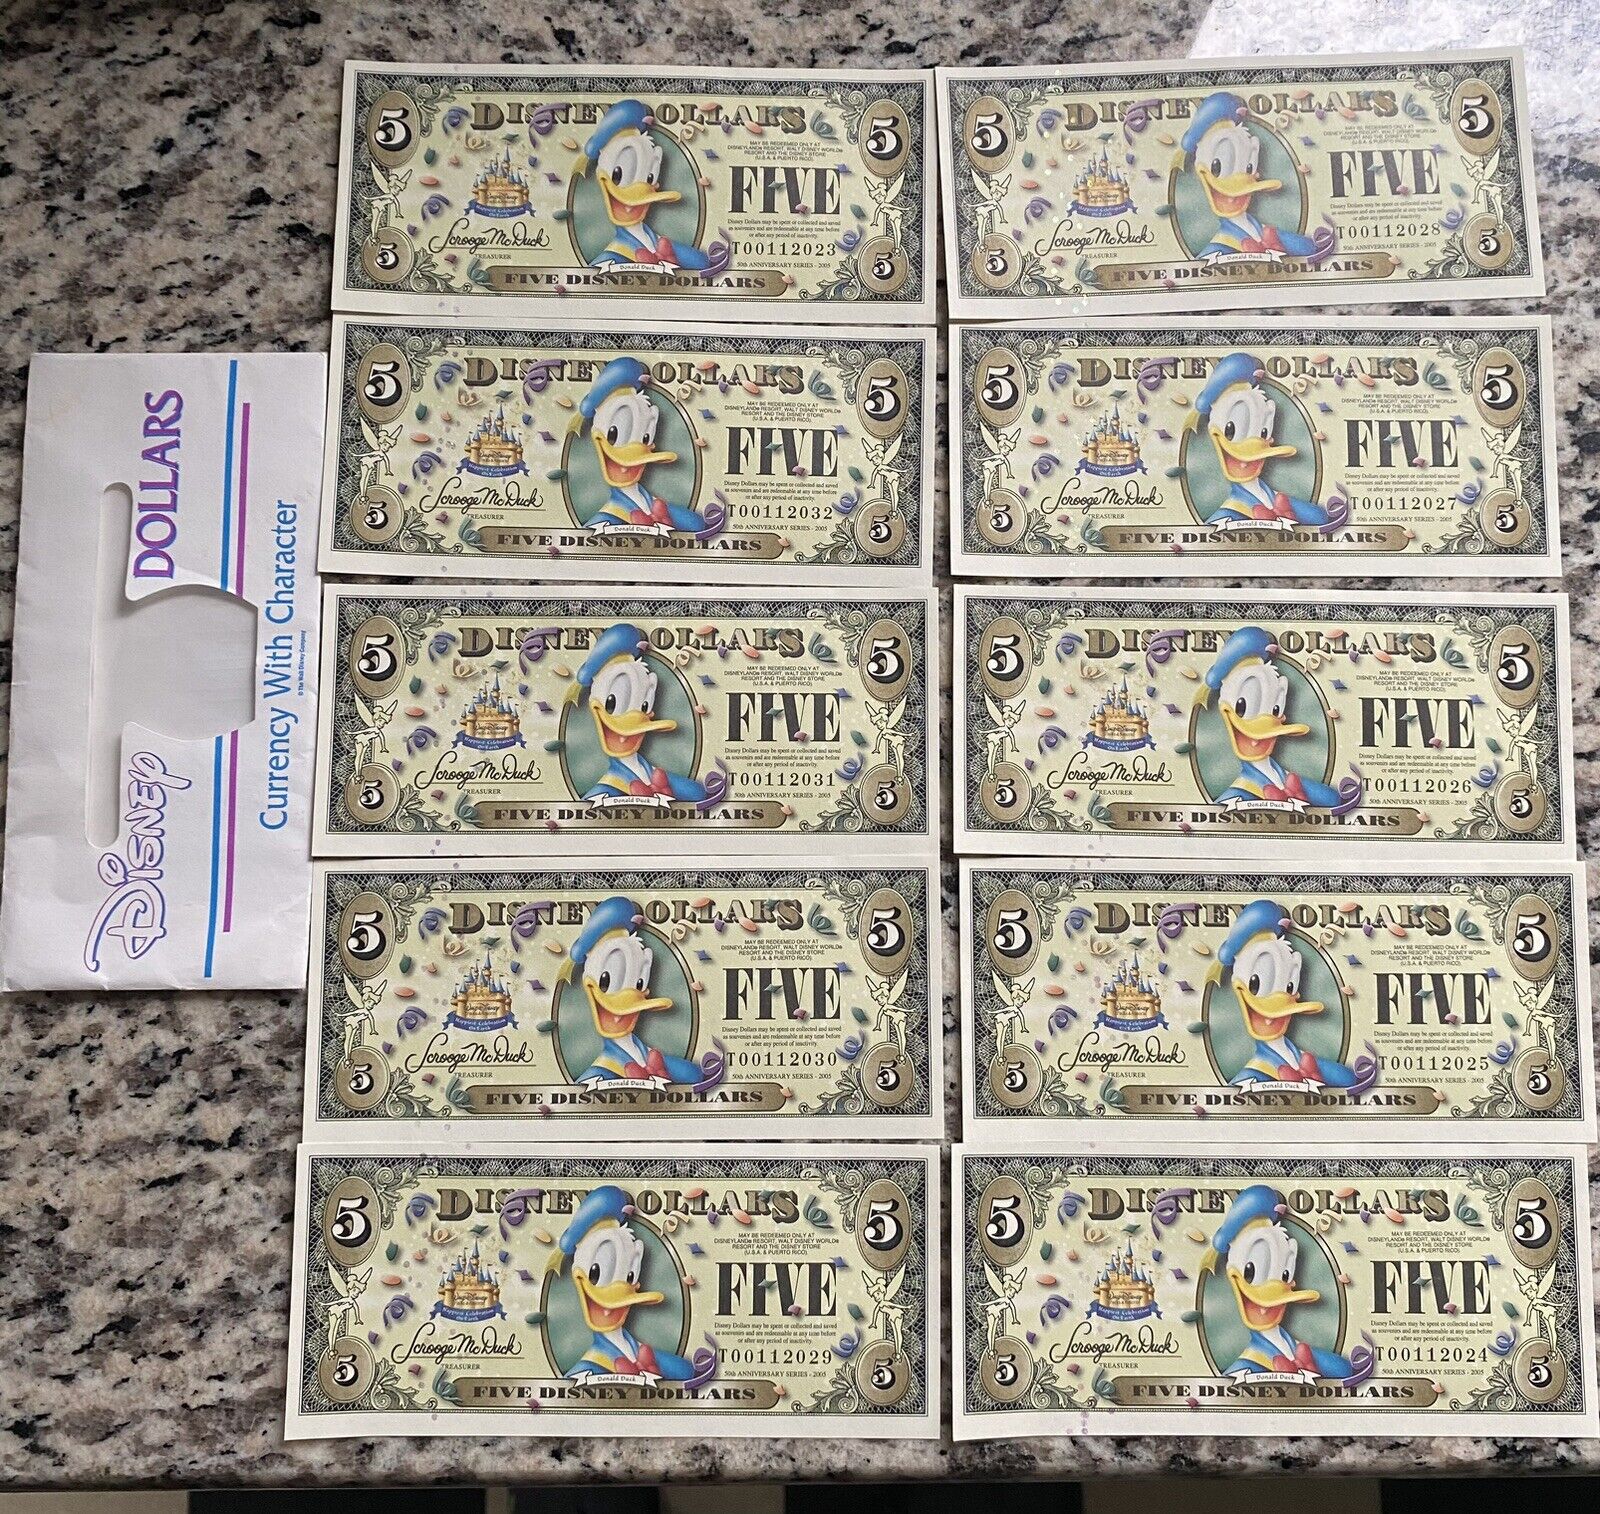 10 - 2005 Donald $5 50th Anniversary T SEQUENTIAL NO Barcode Disney Dollars